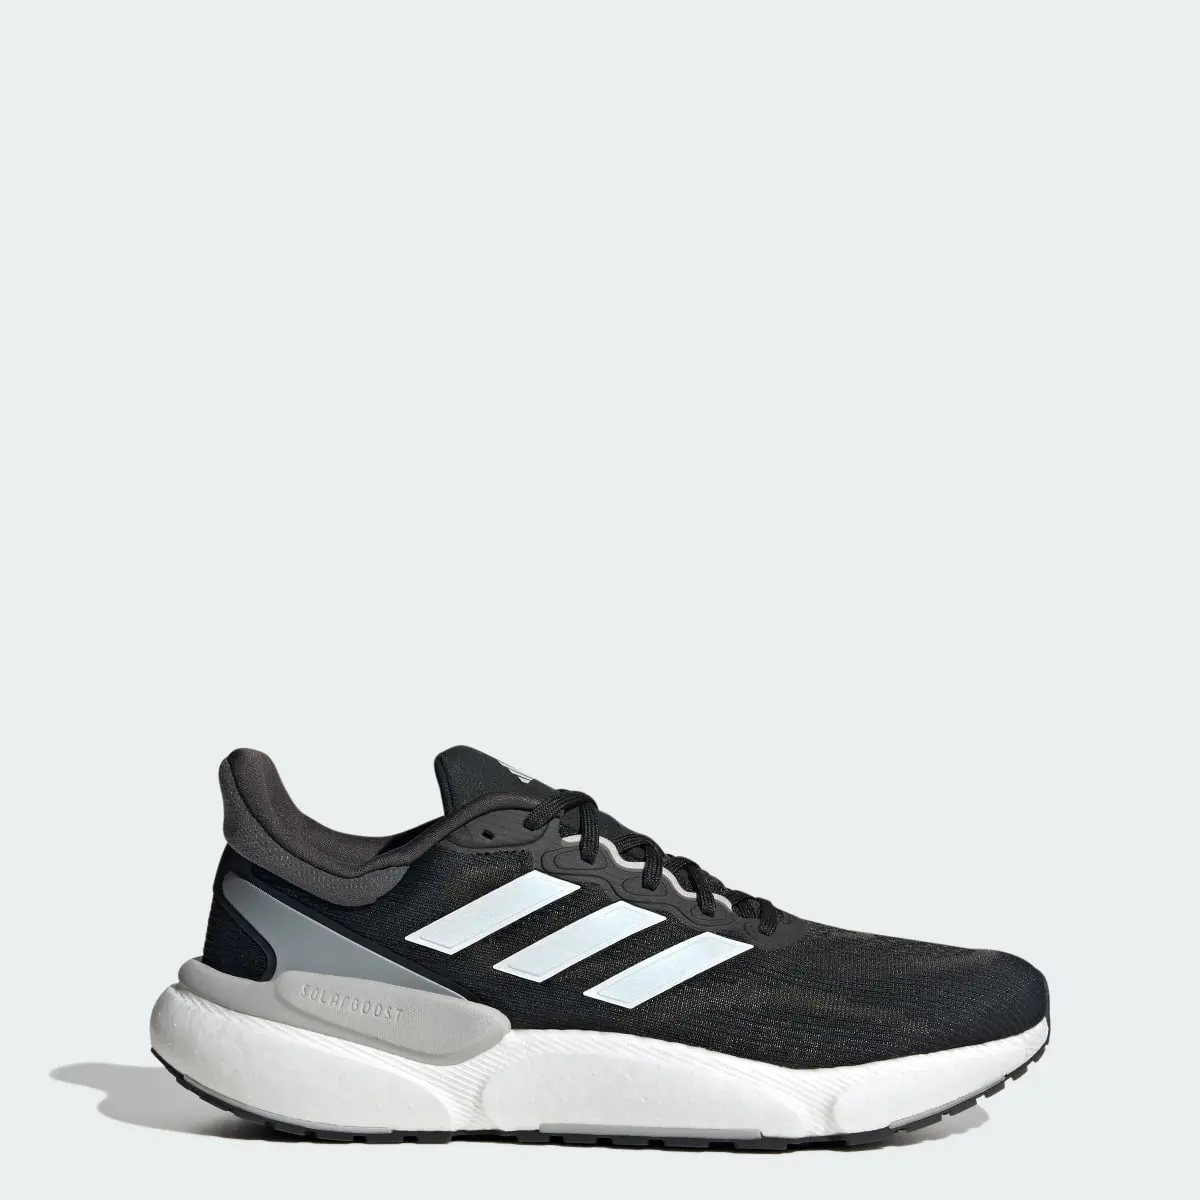 Adidas Solarboost 5 Shoes. 1